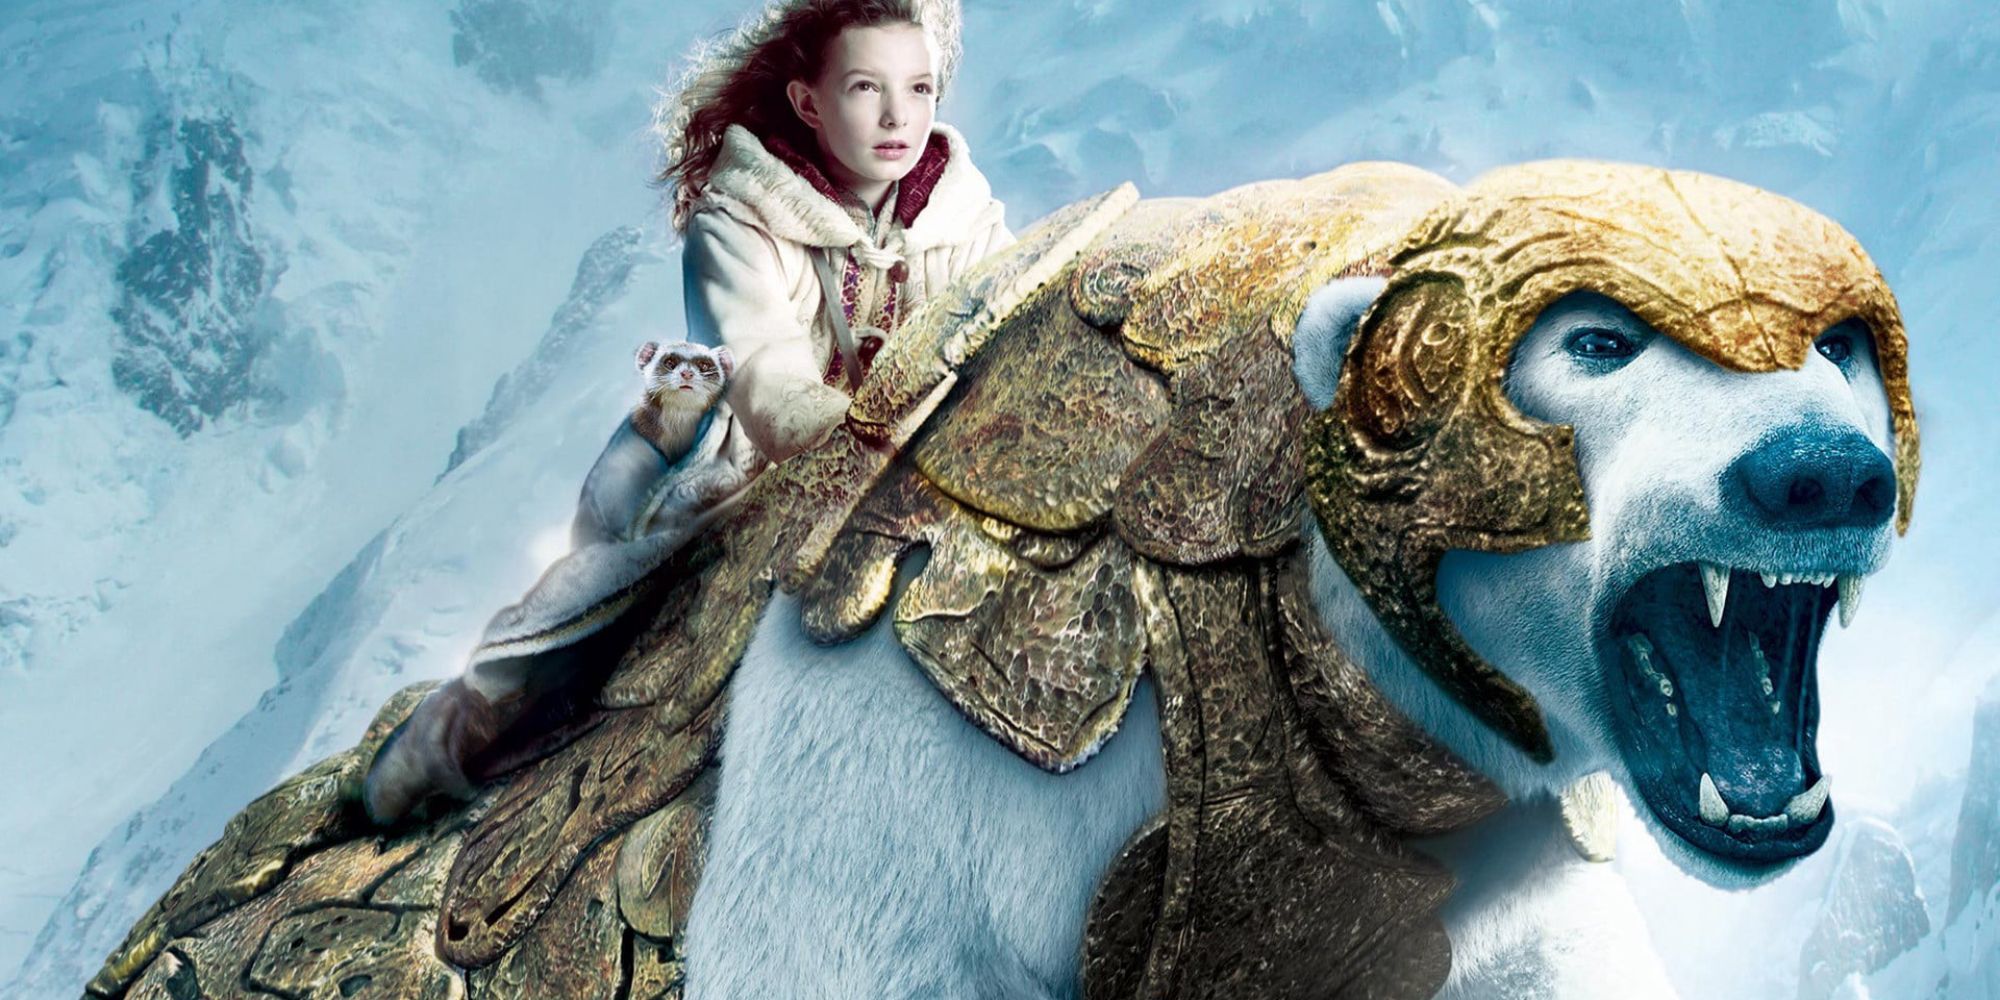 Promotional image for 'The Golden Compass'